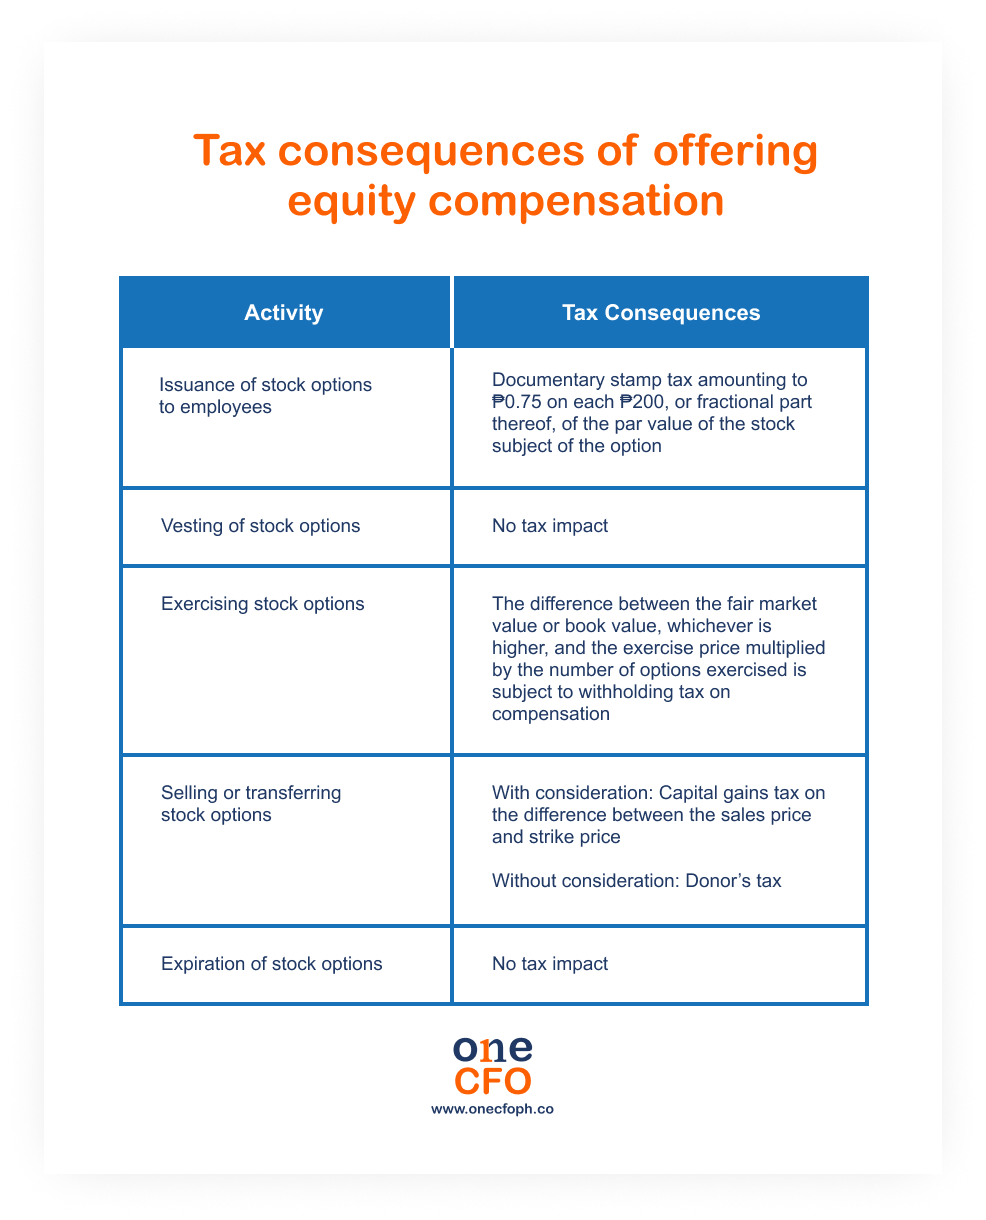 Tax consequences of offering equity compensation